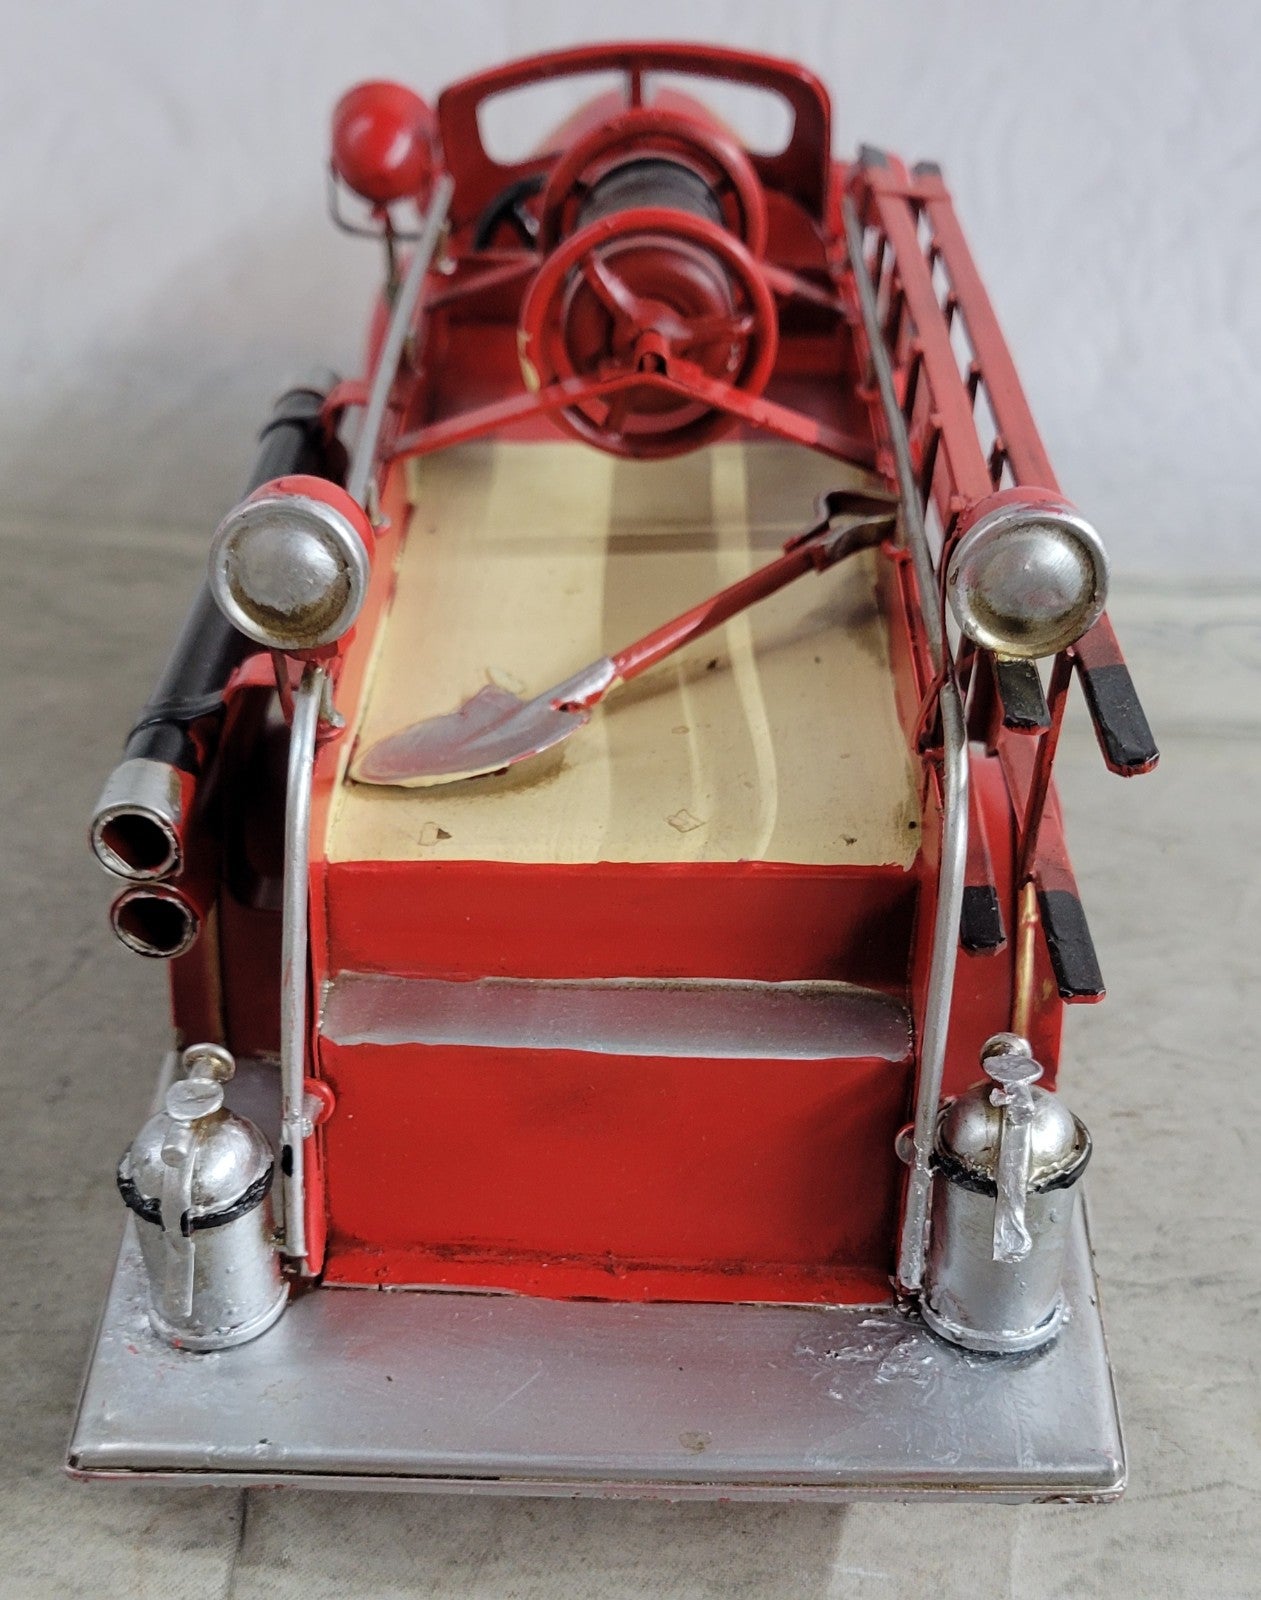 Ford created this sturdy little pumper for the Georgetown Engine Company No. 1